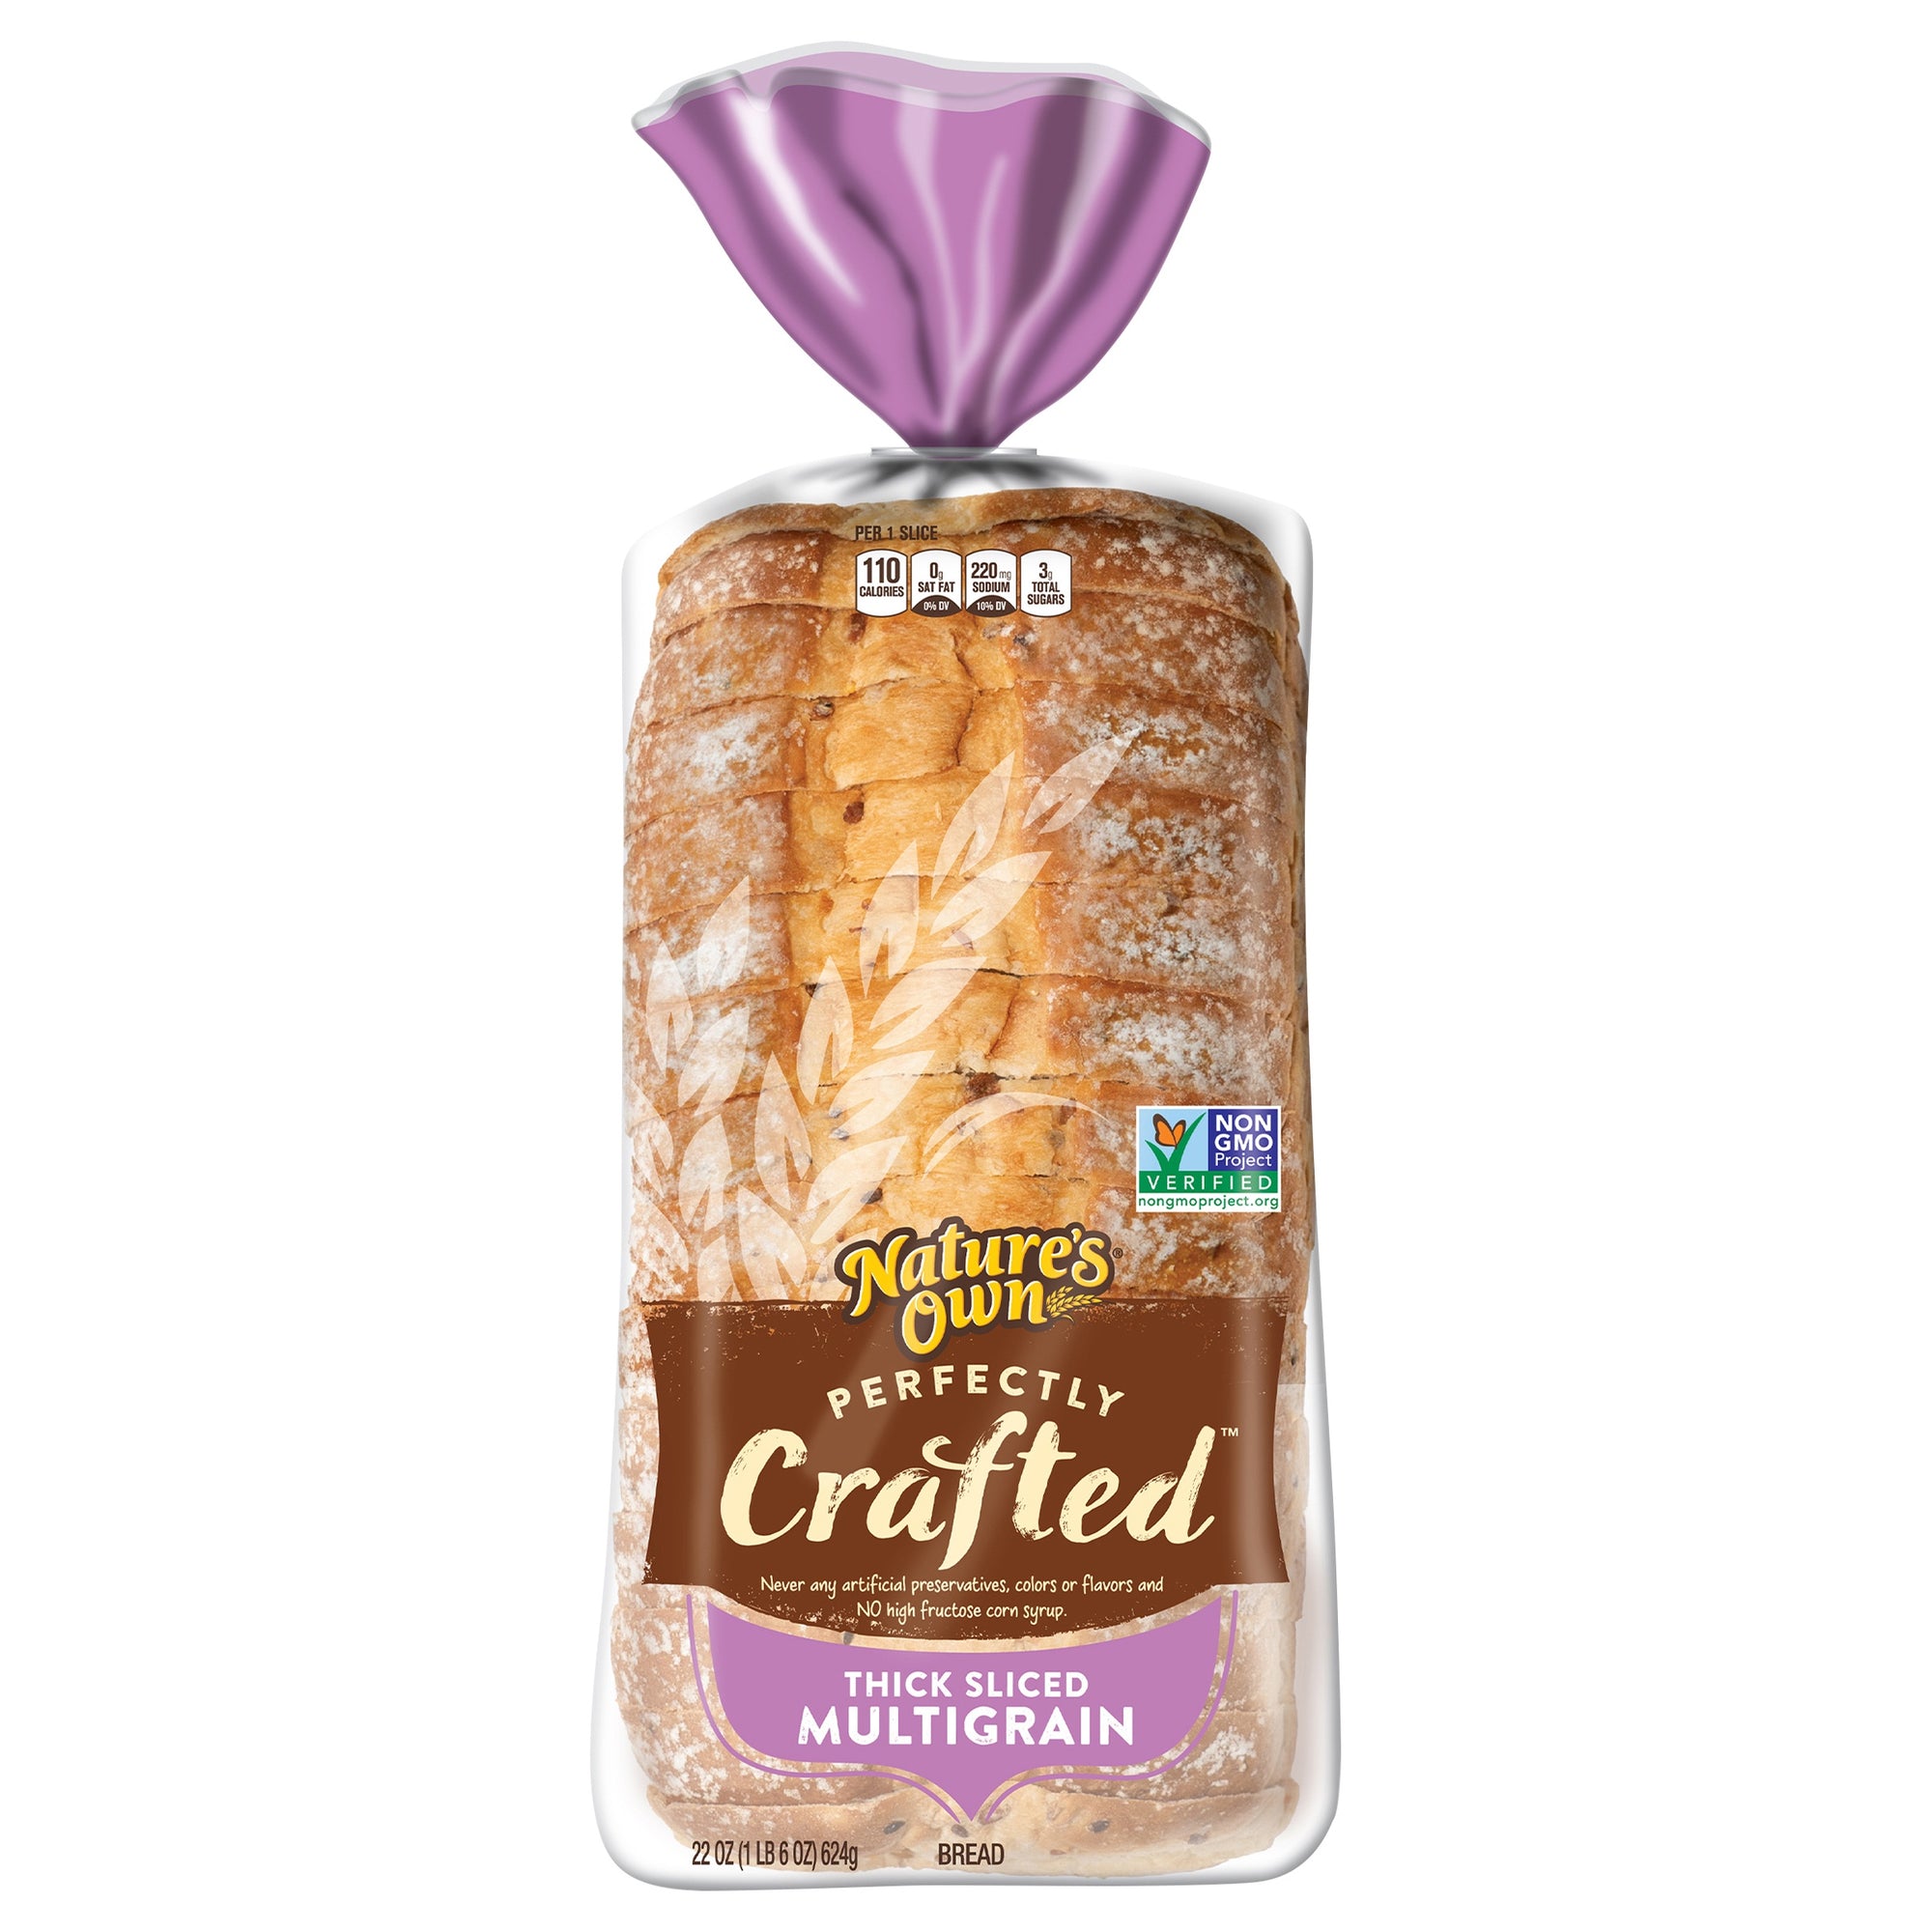 Natures Own Perfectly Crafted Multi Grain Bread, 20 Oz